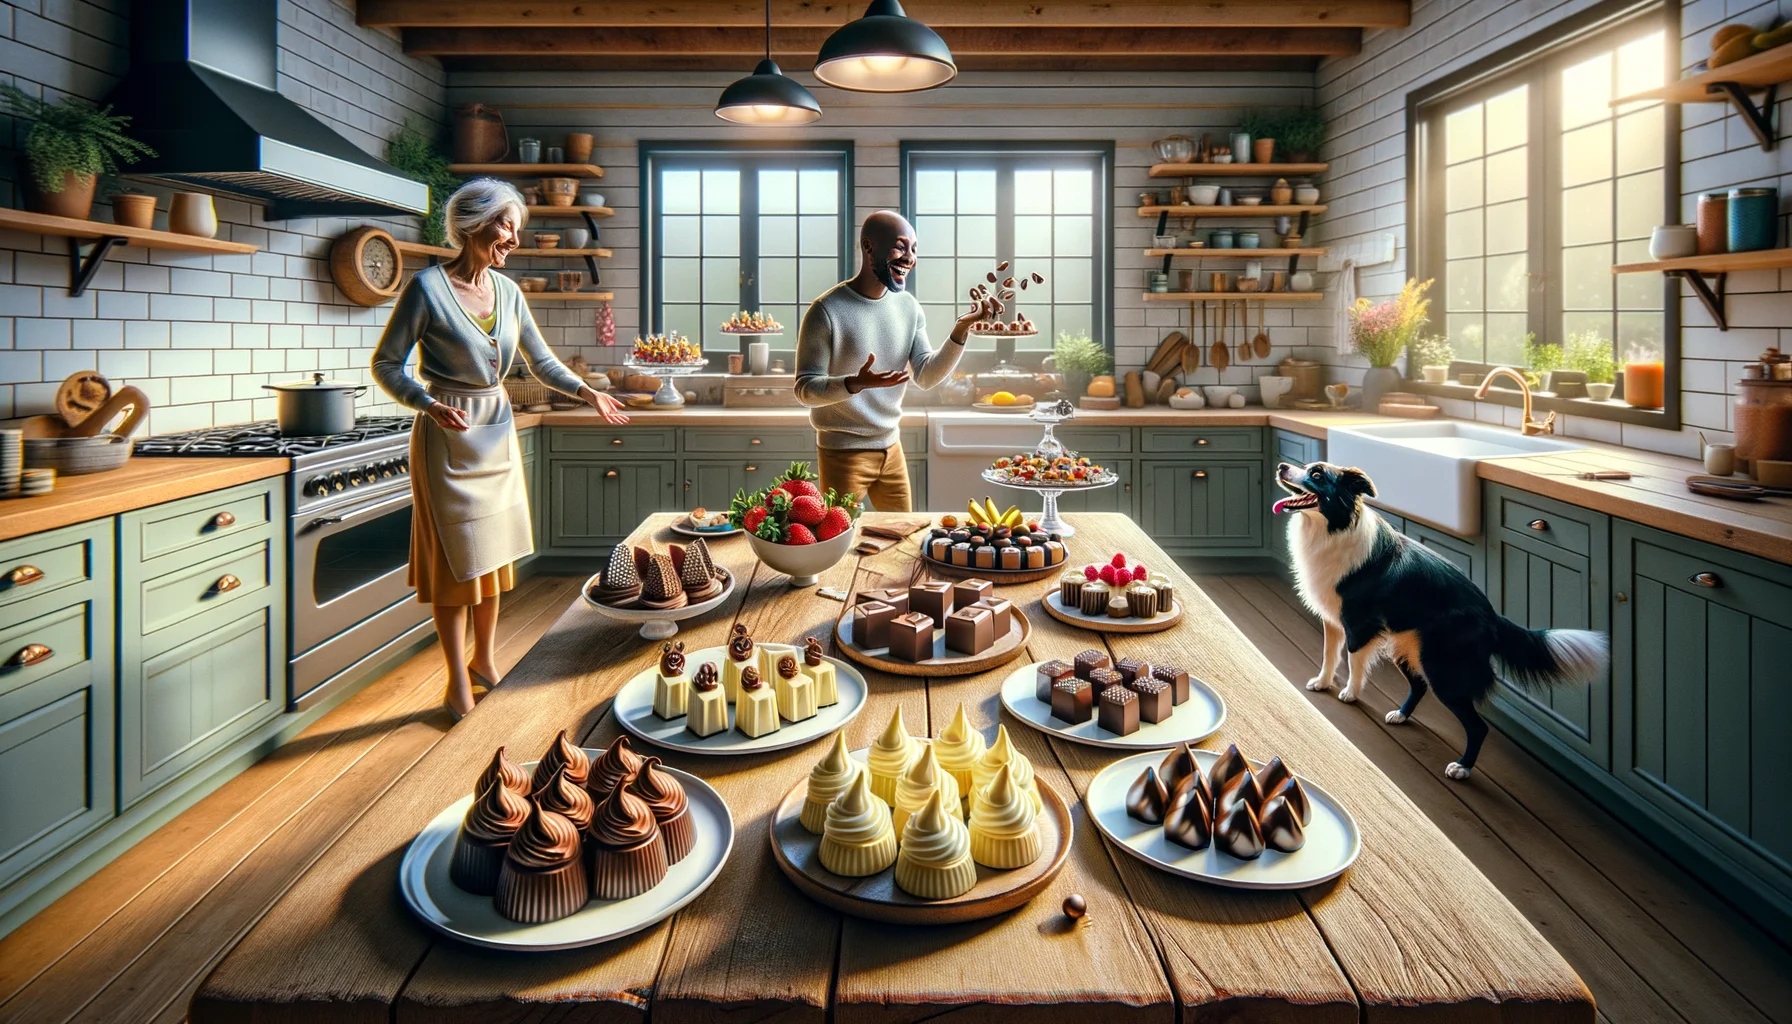 Create a beautifully realistic image of a perfect scenario for showcasing 'Lactose-Free Chocolate Treats'. Picture a cozy, rustic, yet modern kitchen. Centered on the wooden table, there is a colorful display of lactose-free chocolate treats of various shapes and sizes. Some treats are artfully positioned to reveal their creamy fillings. The treats are enticing and perfectly placed, giving off a mouth-watering appeal. The natural sunlight striking through the window illuminates the treats, accentuating their delectable allure. In one corner of the room, a couple of enthusiastic lactose-intolerant individuals, a Black man and White woman, as well as a playful Border Collie are eagerly waiting to taste these treats, adding a fun, warm, and inviting atmosphere to the scene.